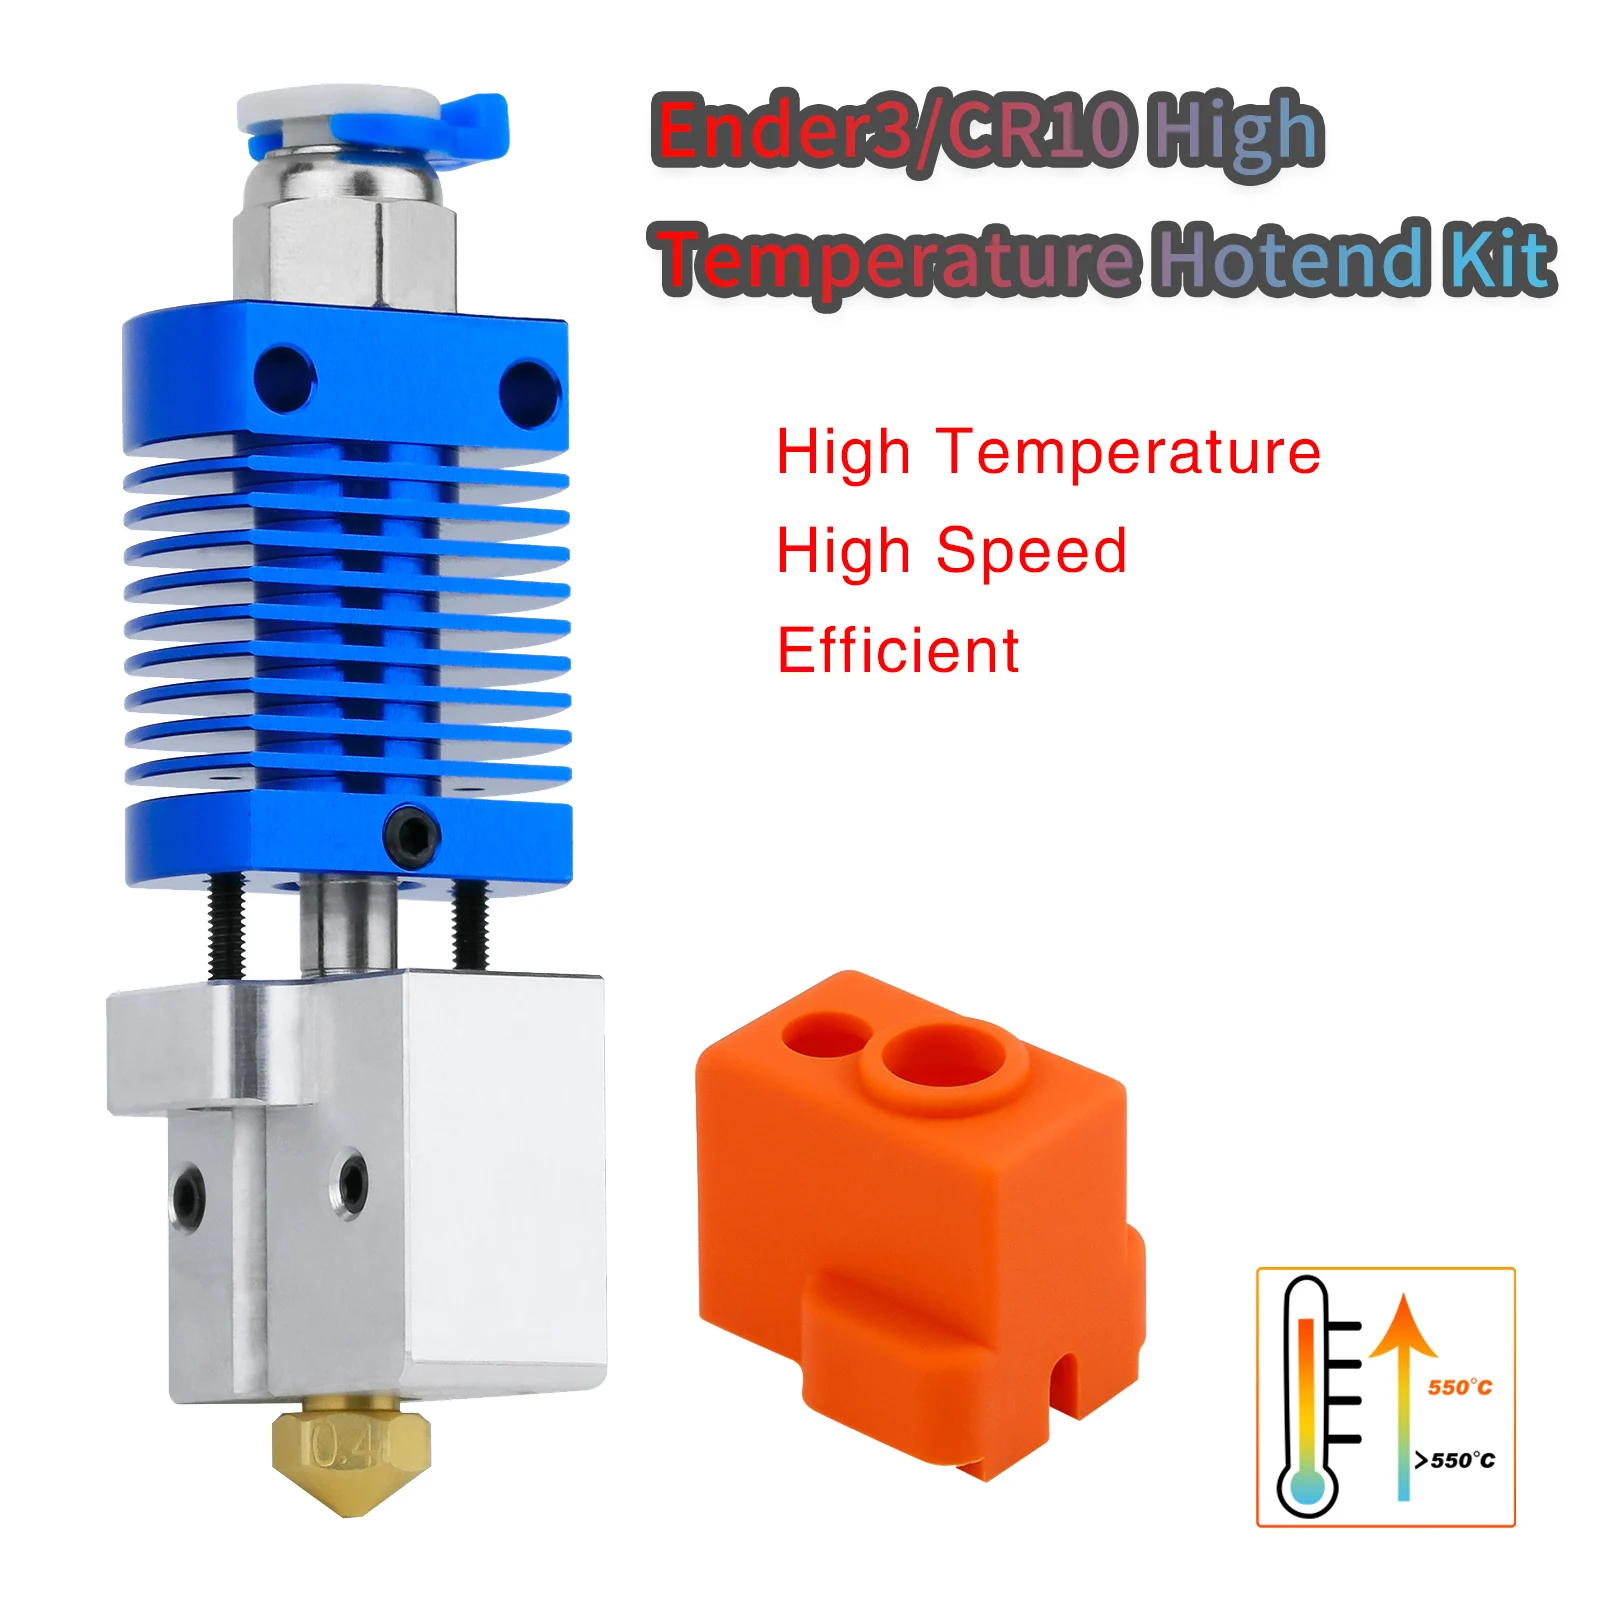 High Temperature Ender3/CR10  Hotend Kit Reach To 550℃ Copper Plated Nozzle Heating Block For Ender-3/Pro/ V2/Ender5/CR10/10S ender 3 high temperature hotend kit copper plated volcano nozzle heating block bimetal throat ender3 pro v2 cr10 10s extruder